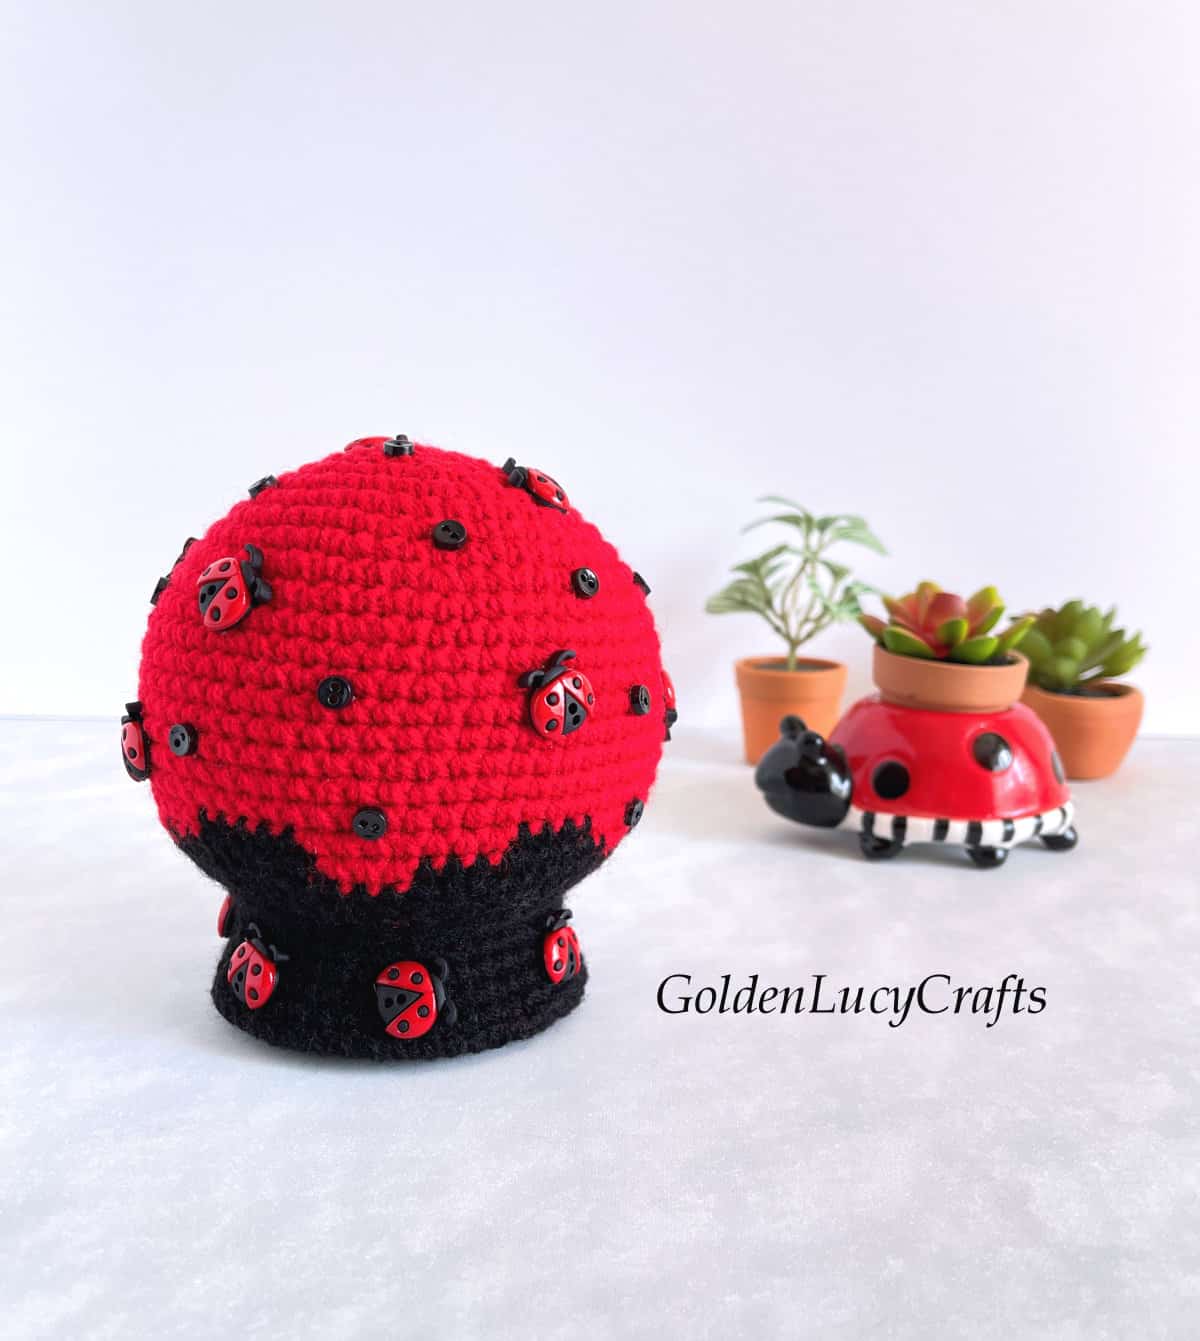 Crochet snow globe made in red and black colors and embellished with ladybug buttons and small black buttons.